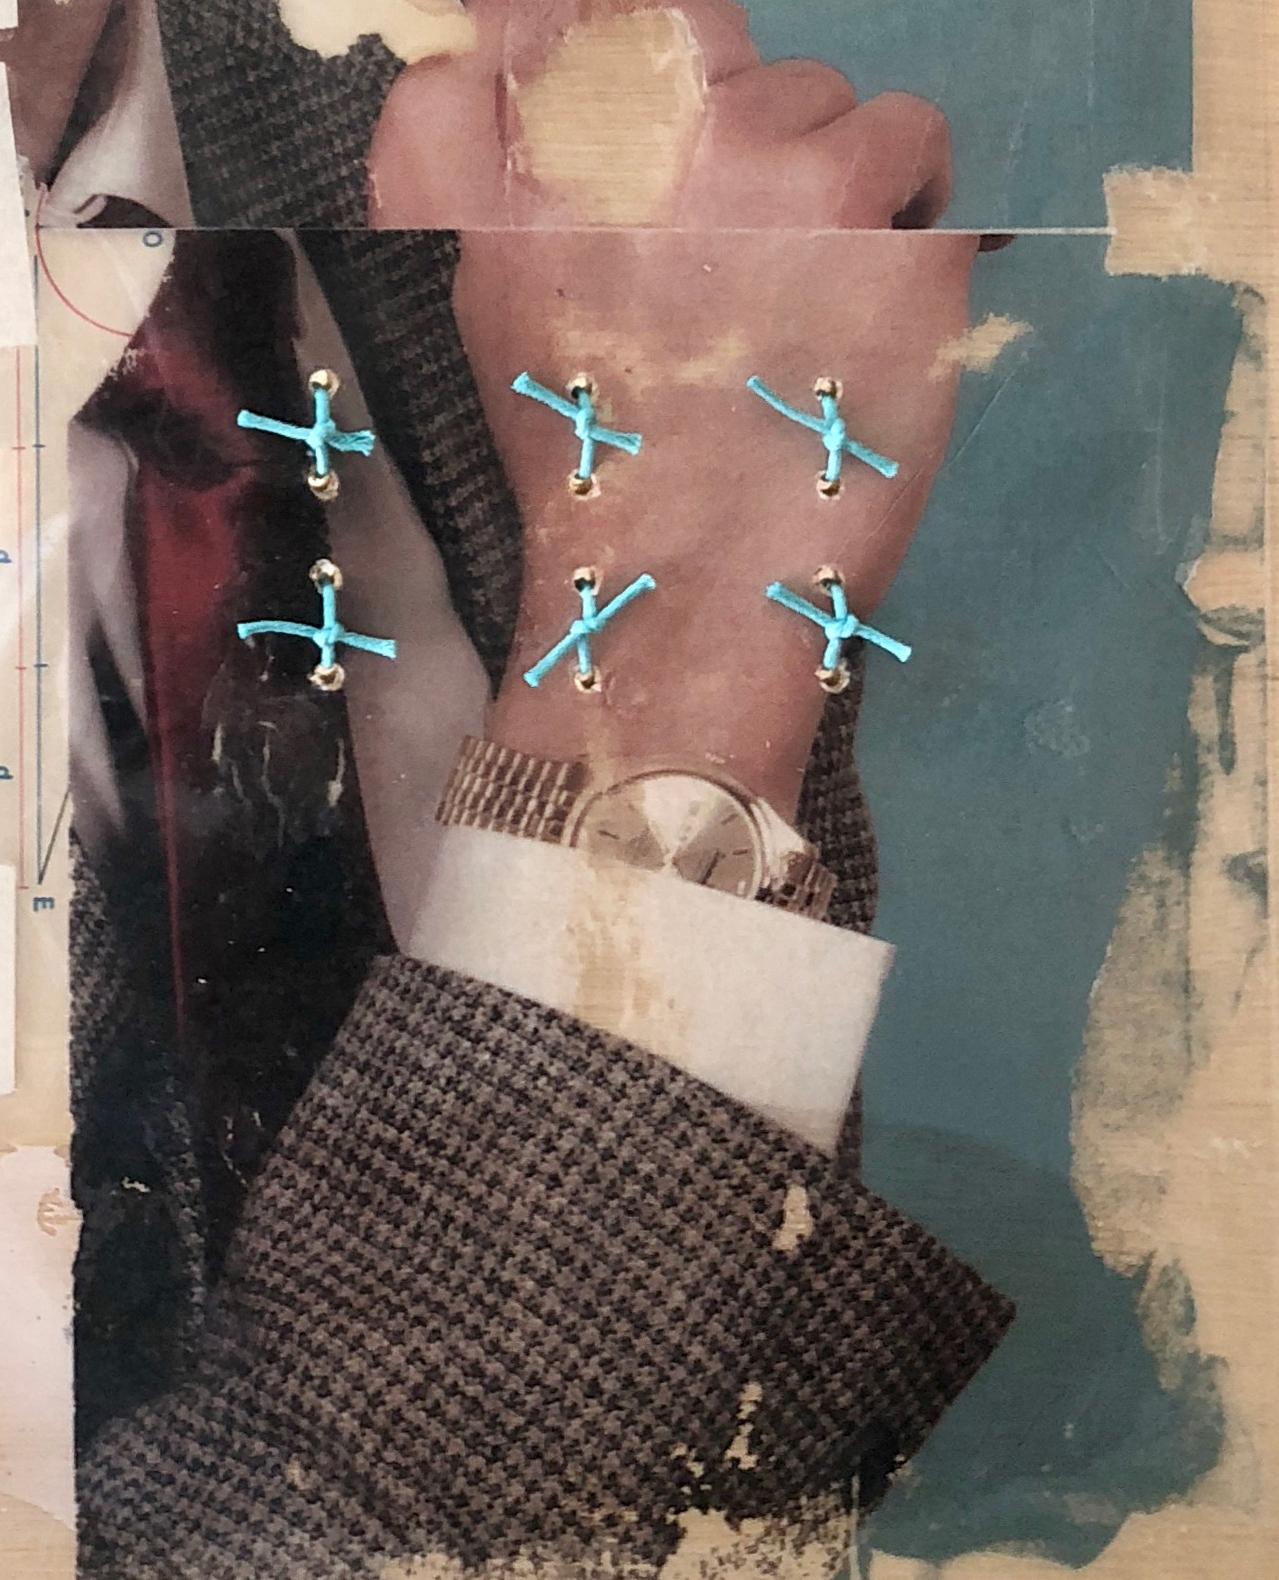 Untitled, 2020
Mix media
Image size: 24 in. H x  17.91 in. W
Collage, image transfer on acetate film, nylon cables ties, oil pastel 
Wood panel
One of a Kind
_________________________________
Roberto Fonfría lives and works in Miami, Fl 
He was born